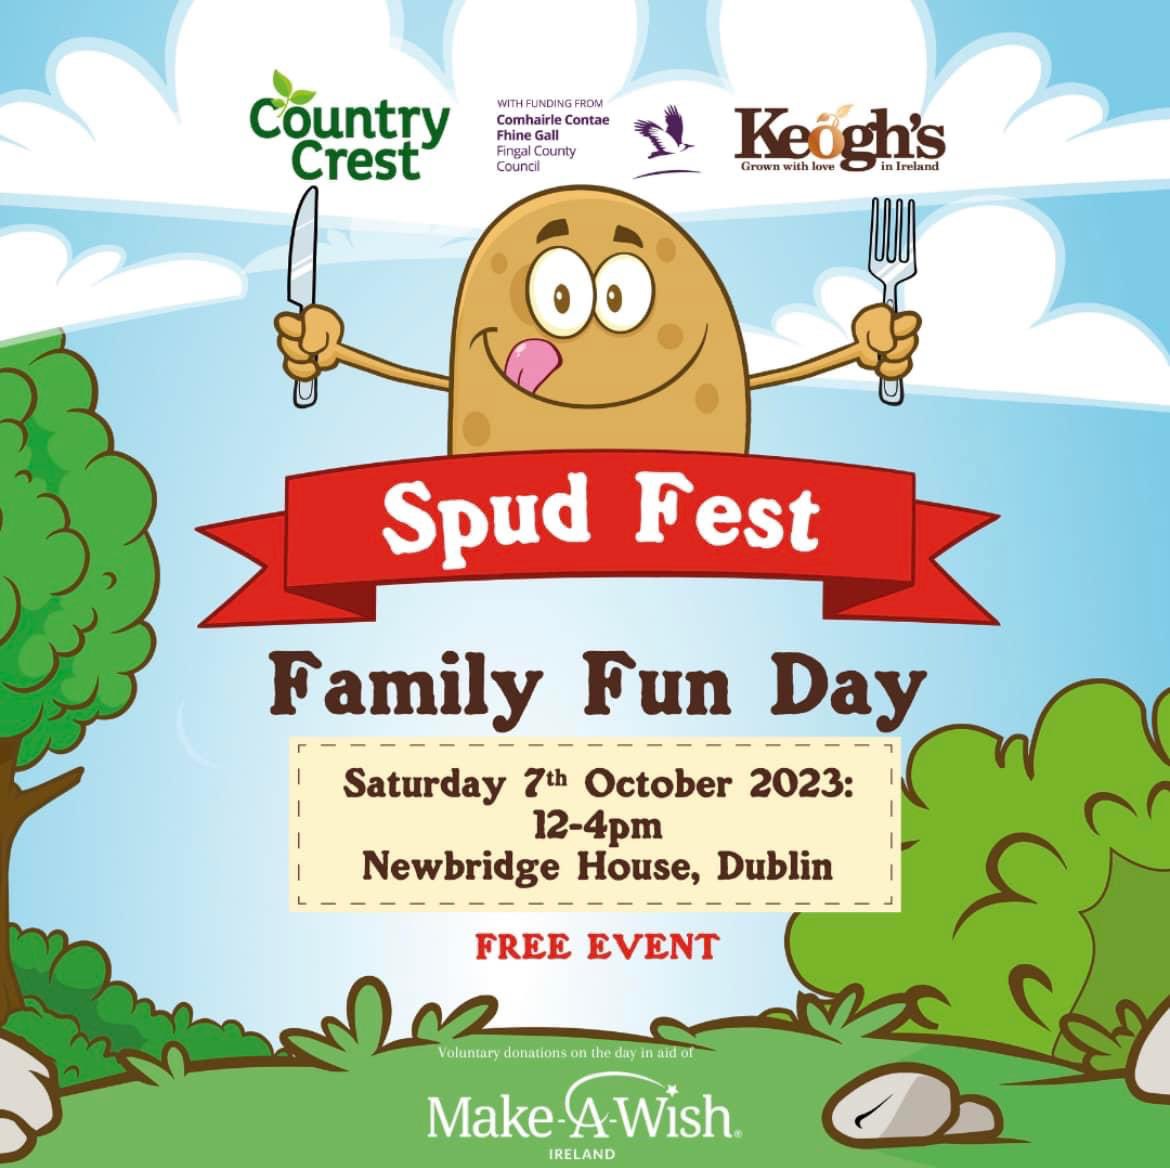 Join @CountryCrest & @Keoghsfarm @NewbridgeHF today for a free family day to celebrate the mighty spud! ▪️cookery demos ▪️delicious baked potatoes ▪️children’s games ▪️bouncy castles and entertainment. All donations on the day for Make-A-Wish Ireland will be very welcome